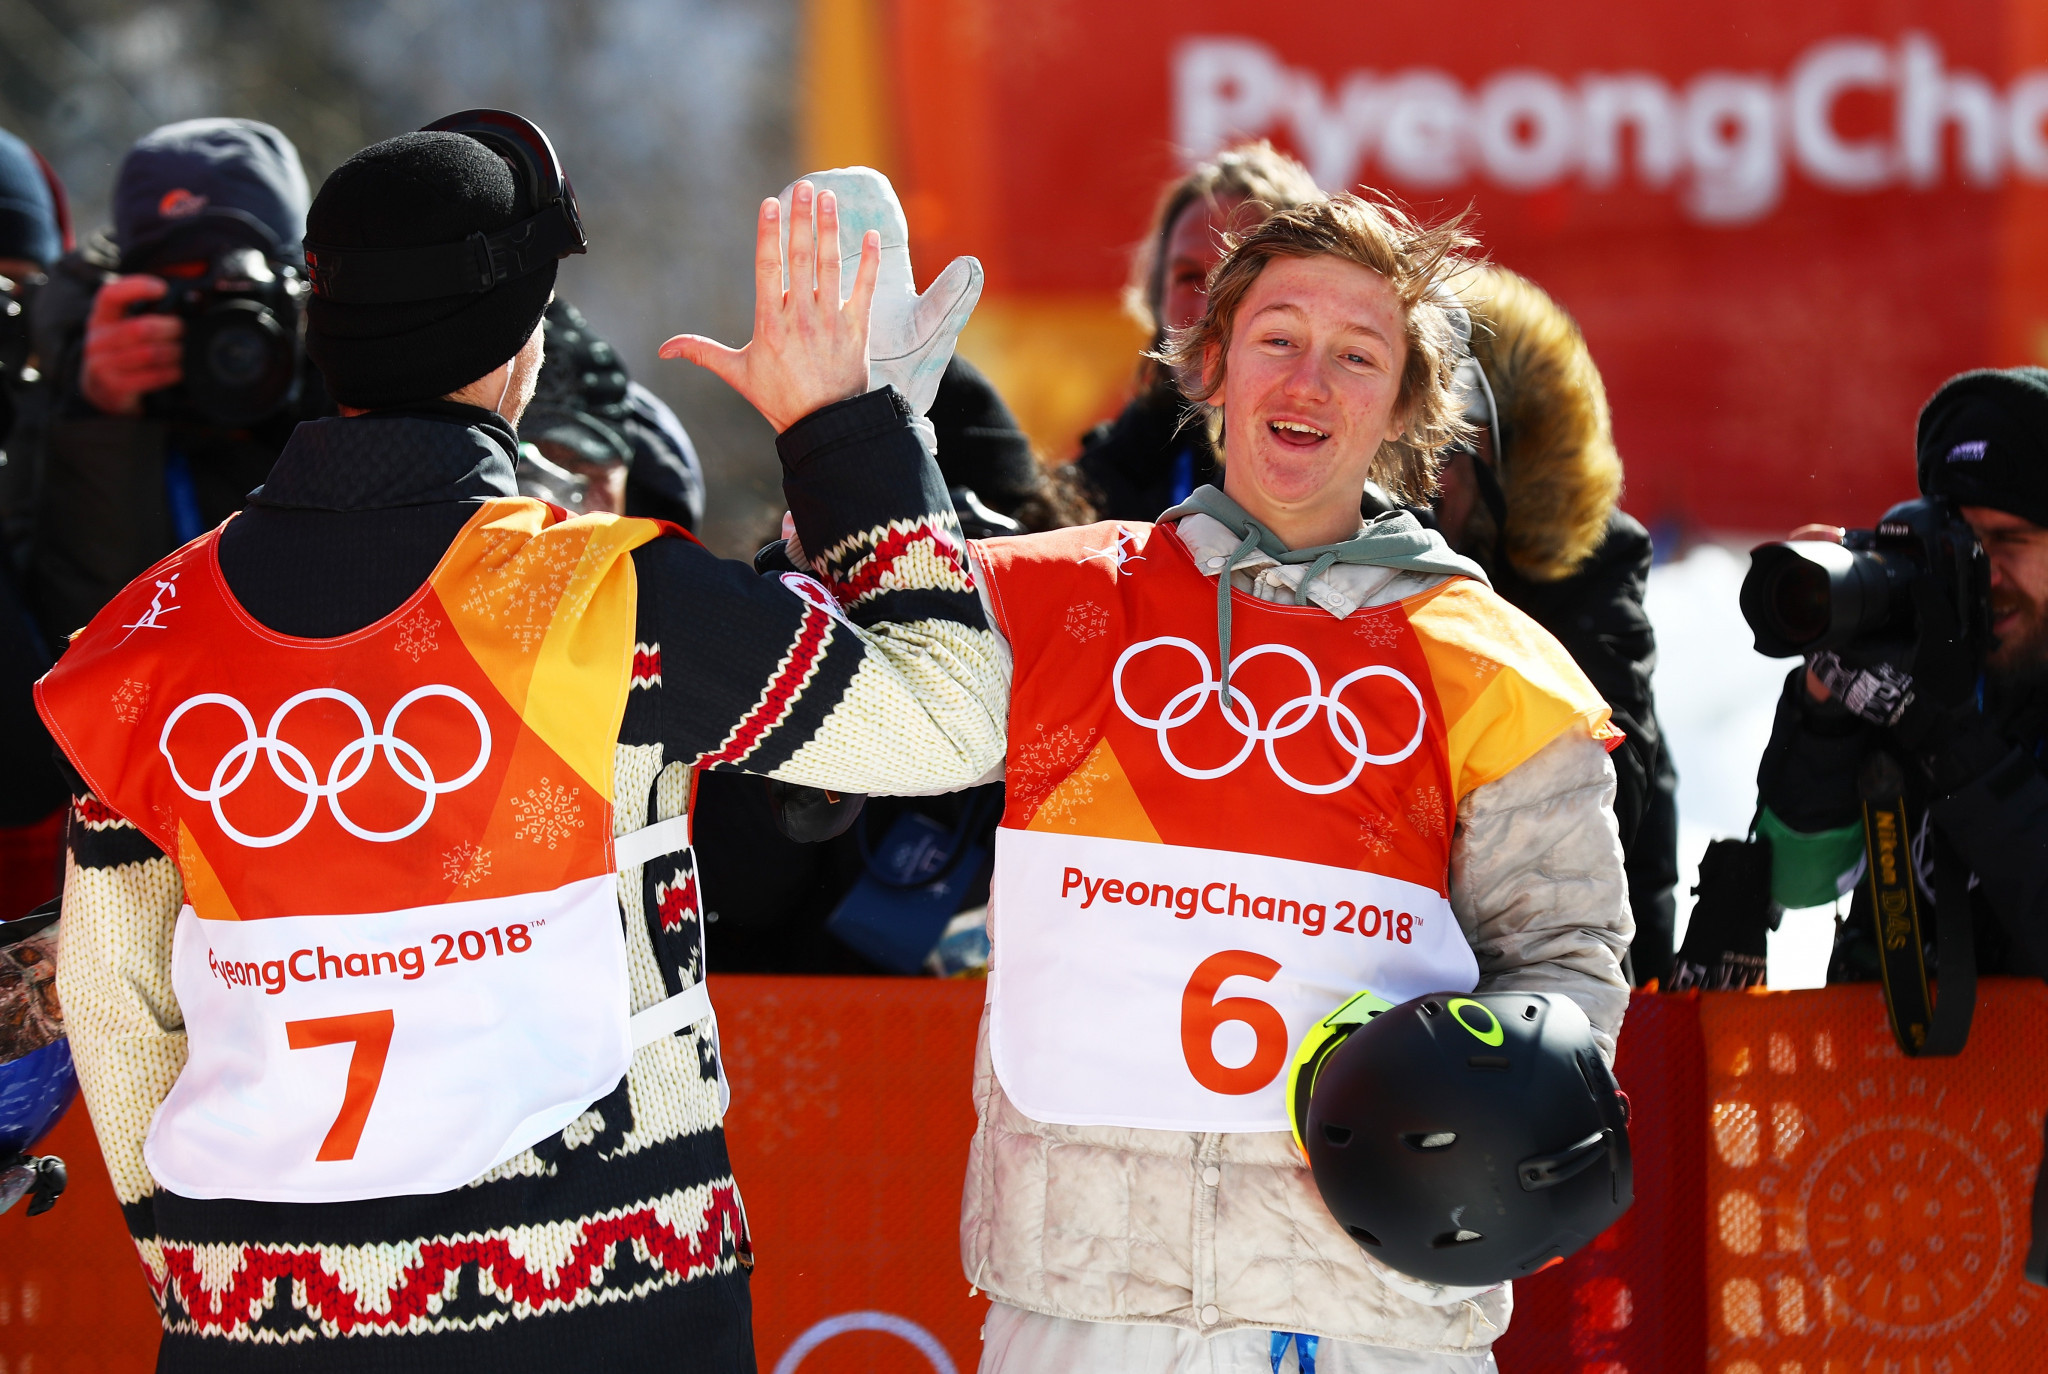 Teenage snowboarder wins America's first gold medal at Pyeongchang 2018